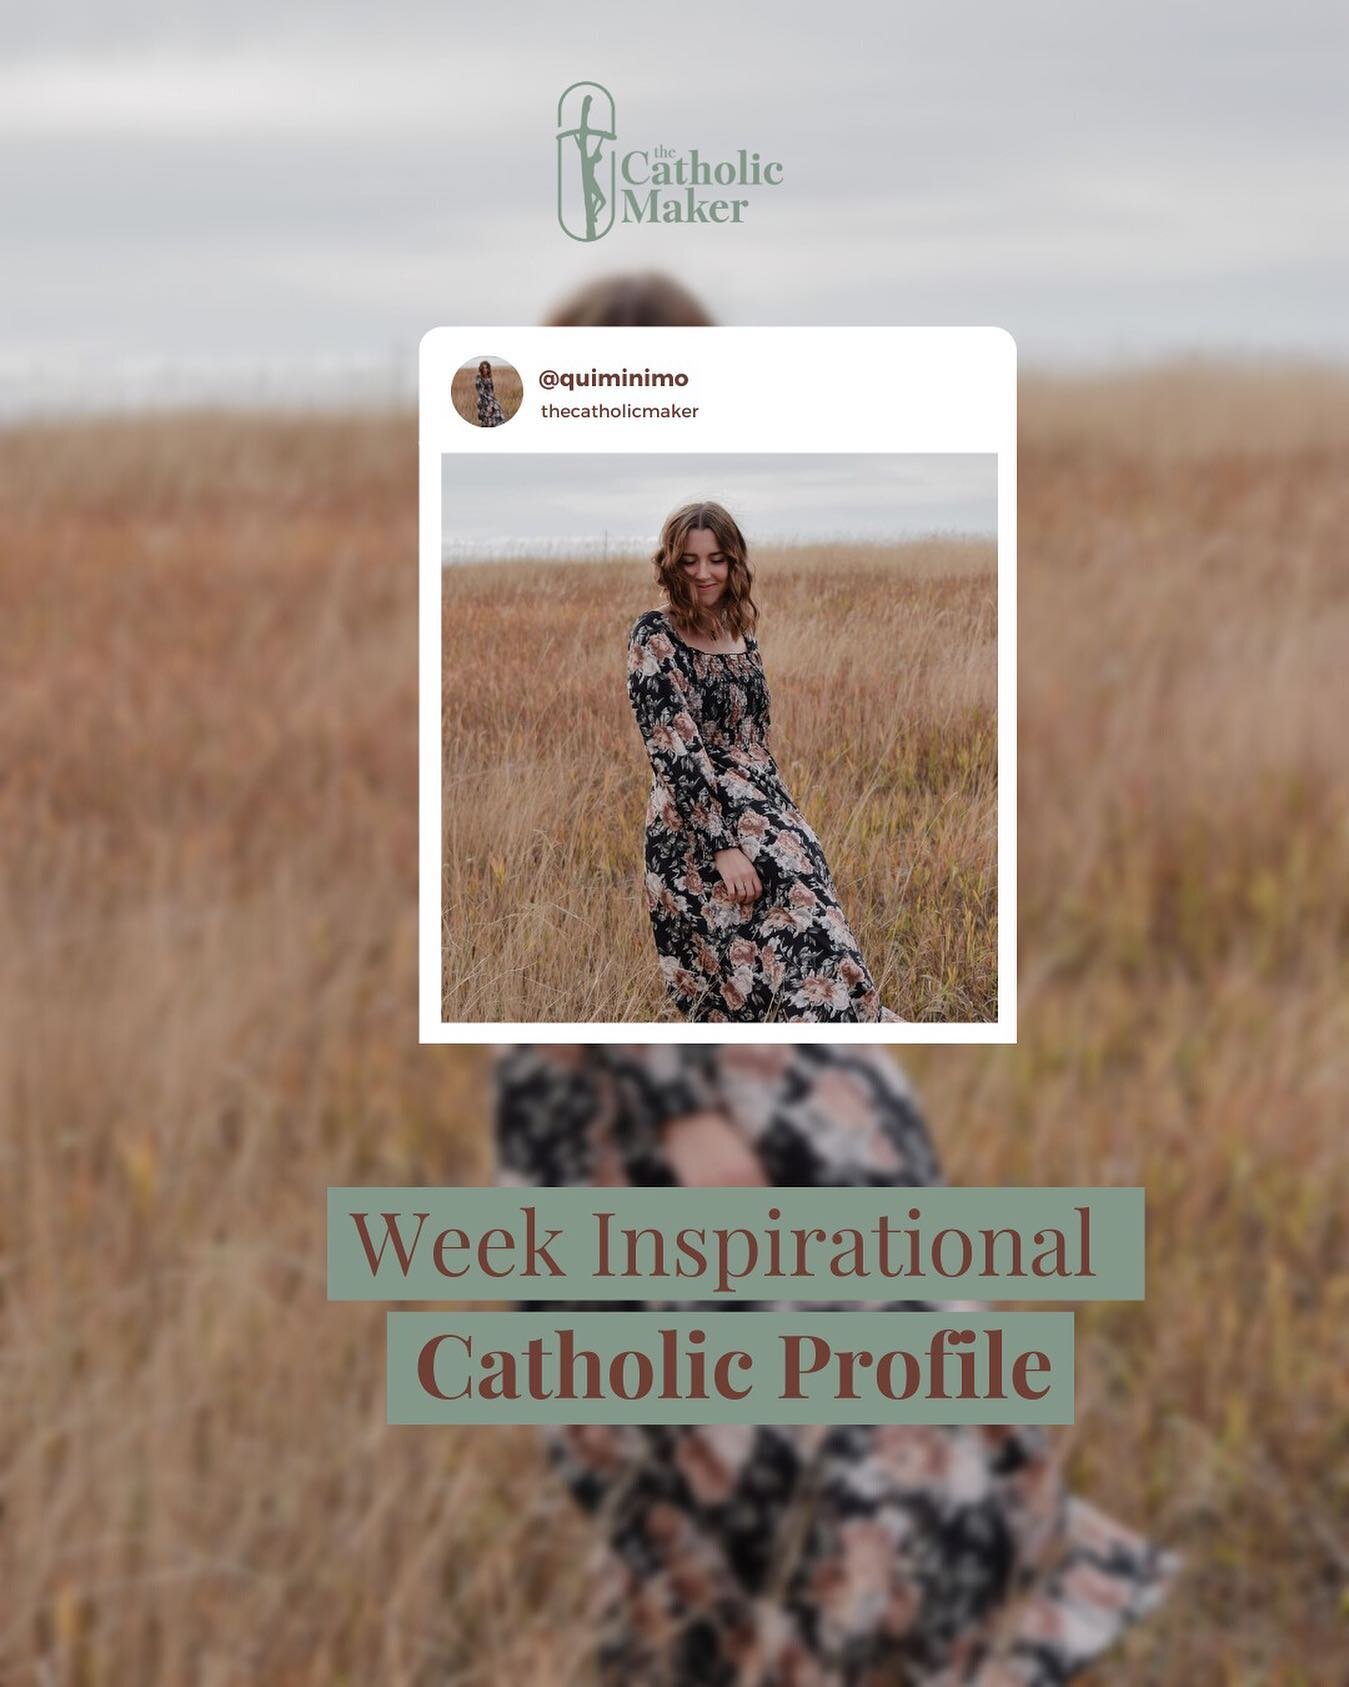 On today&rsquo;s inspirational Catholic profiles, we introduce you to @quiminimo.

She is a faithful catholic and also one of our favorite Instagram accounts. She produces brown scapulars (and they&rsquo;re beautiful). But what makes her even more ex